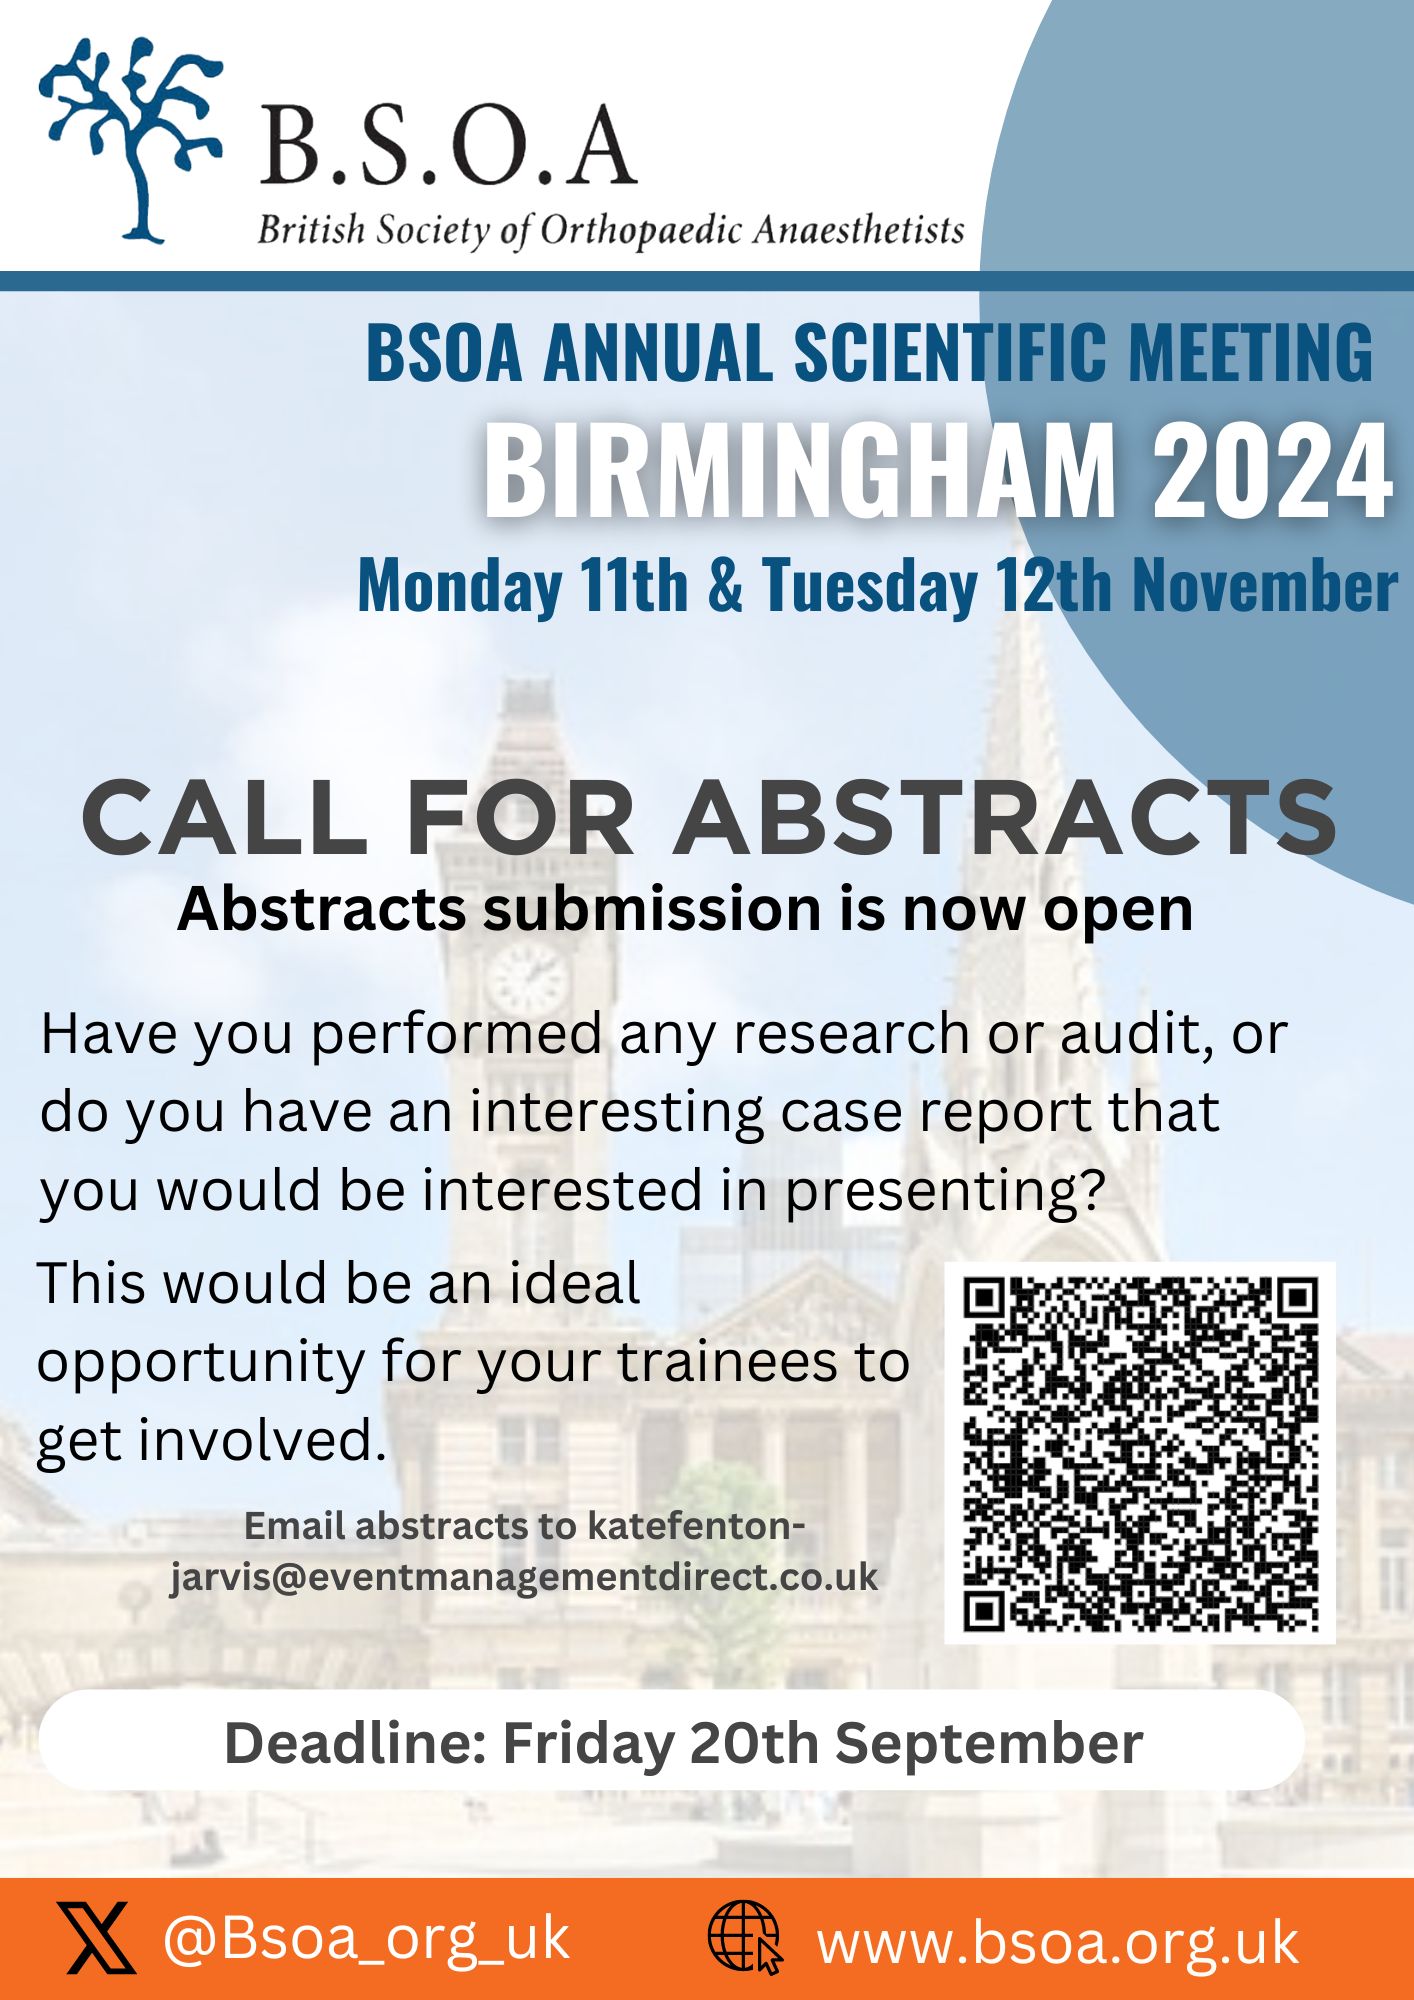 BSOA 2024 ABSTRACTS OPEN